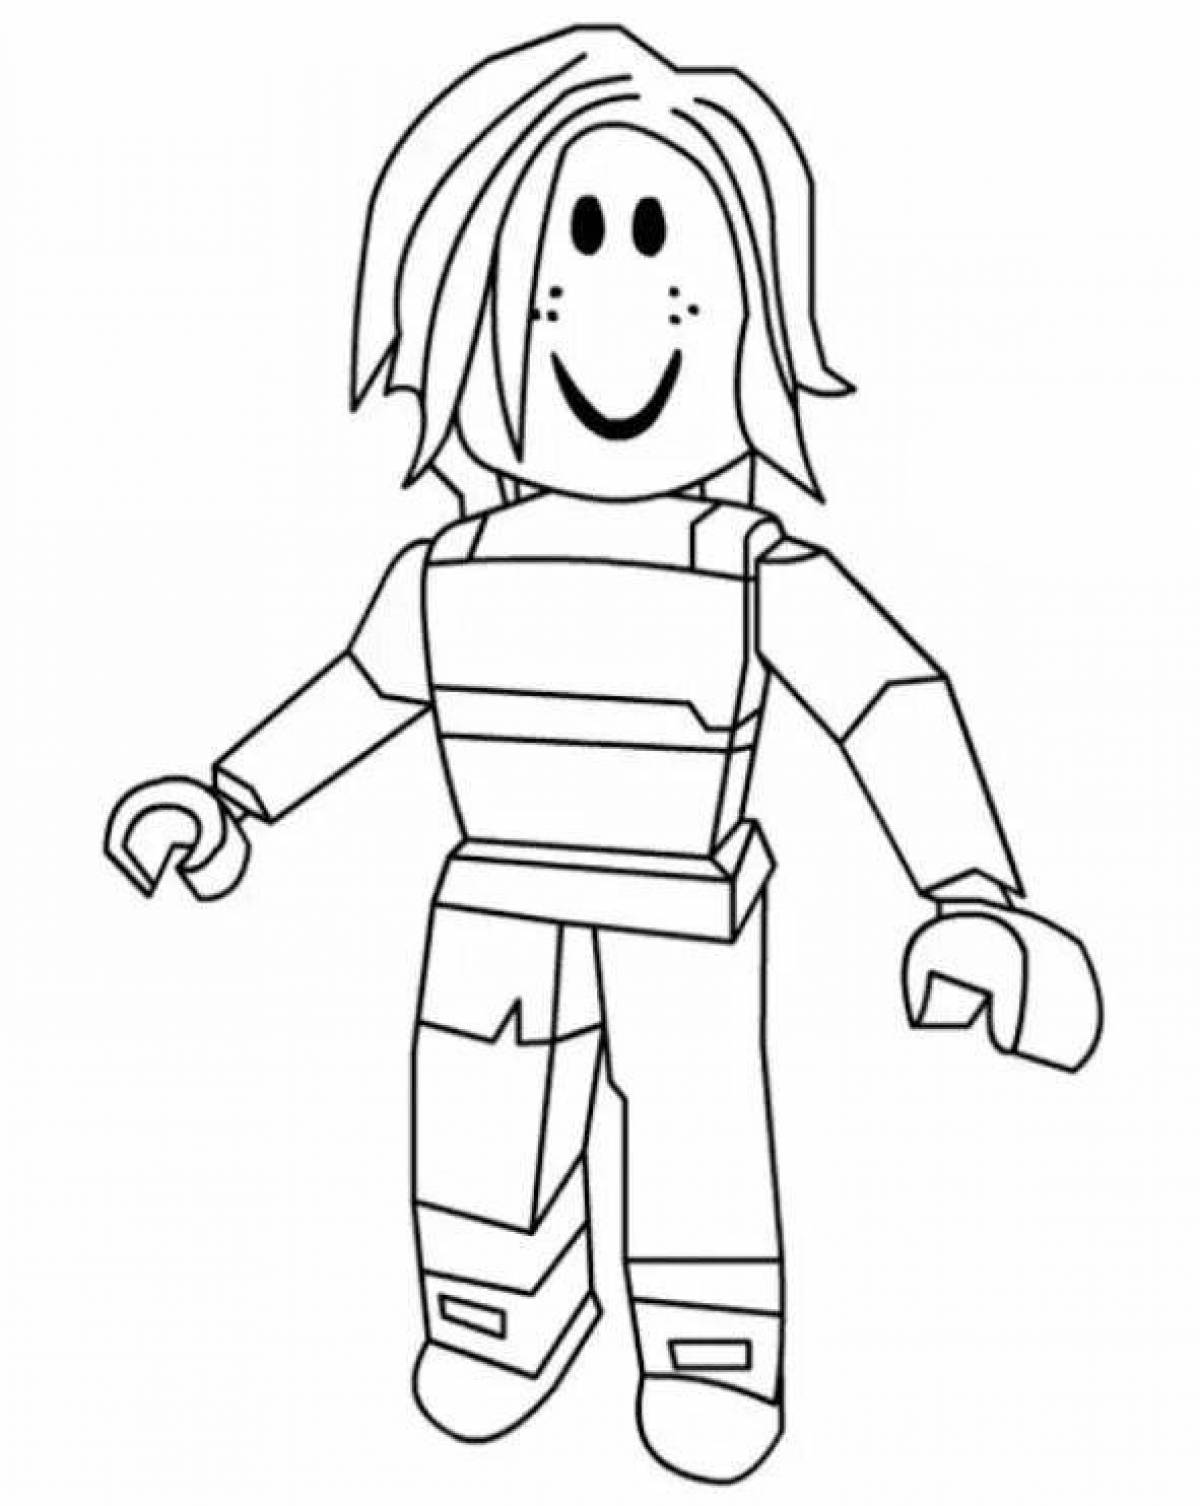 Attraction 100 doors roblox coloring page